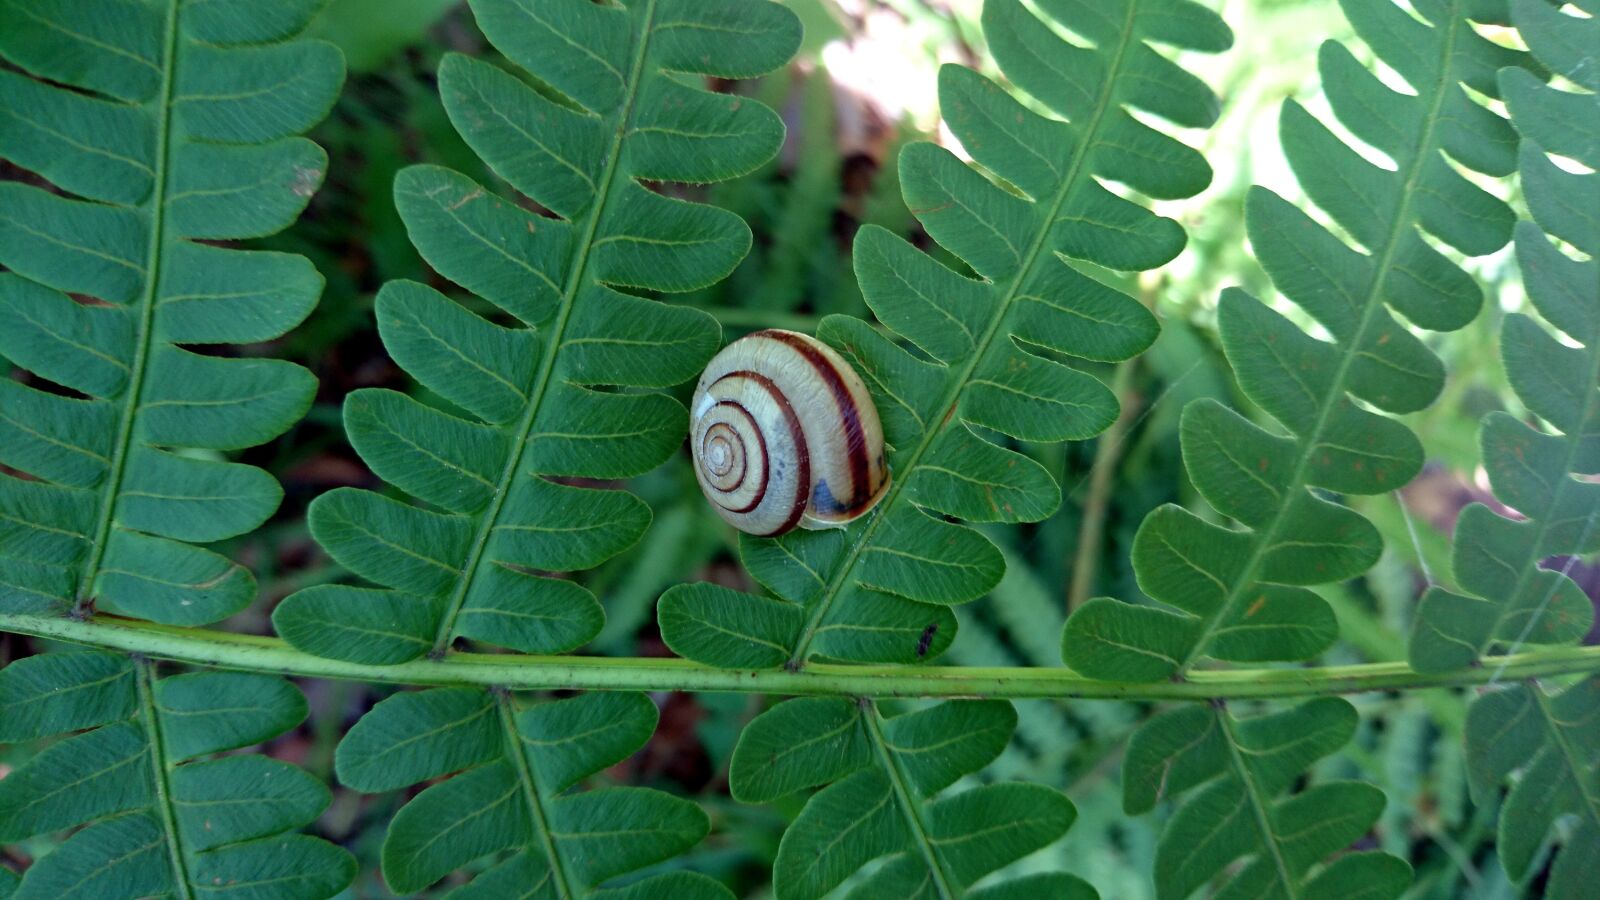 Sony Xperia Z5 Compact sample photo. Snail, fern, nature photography